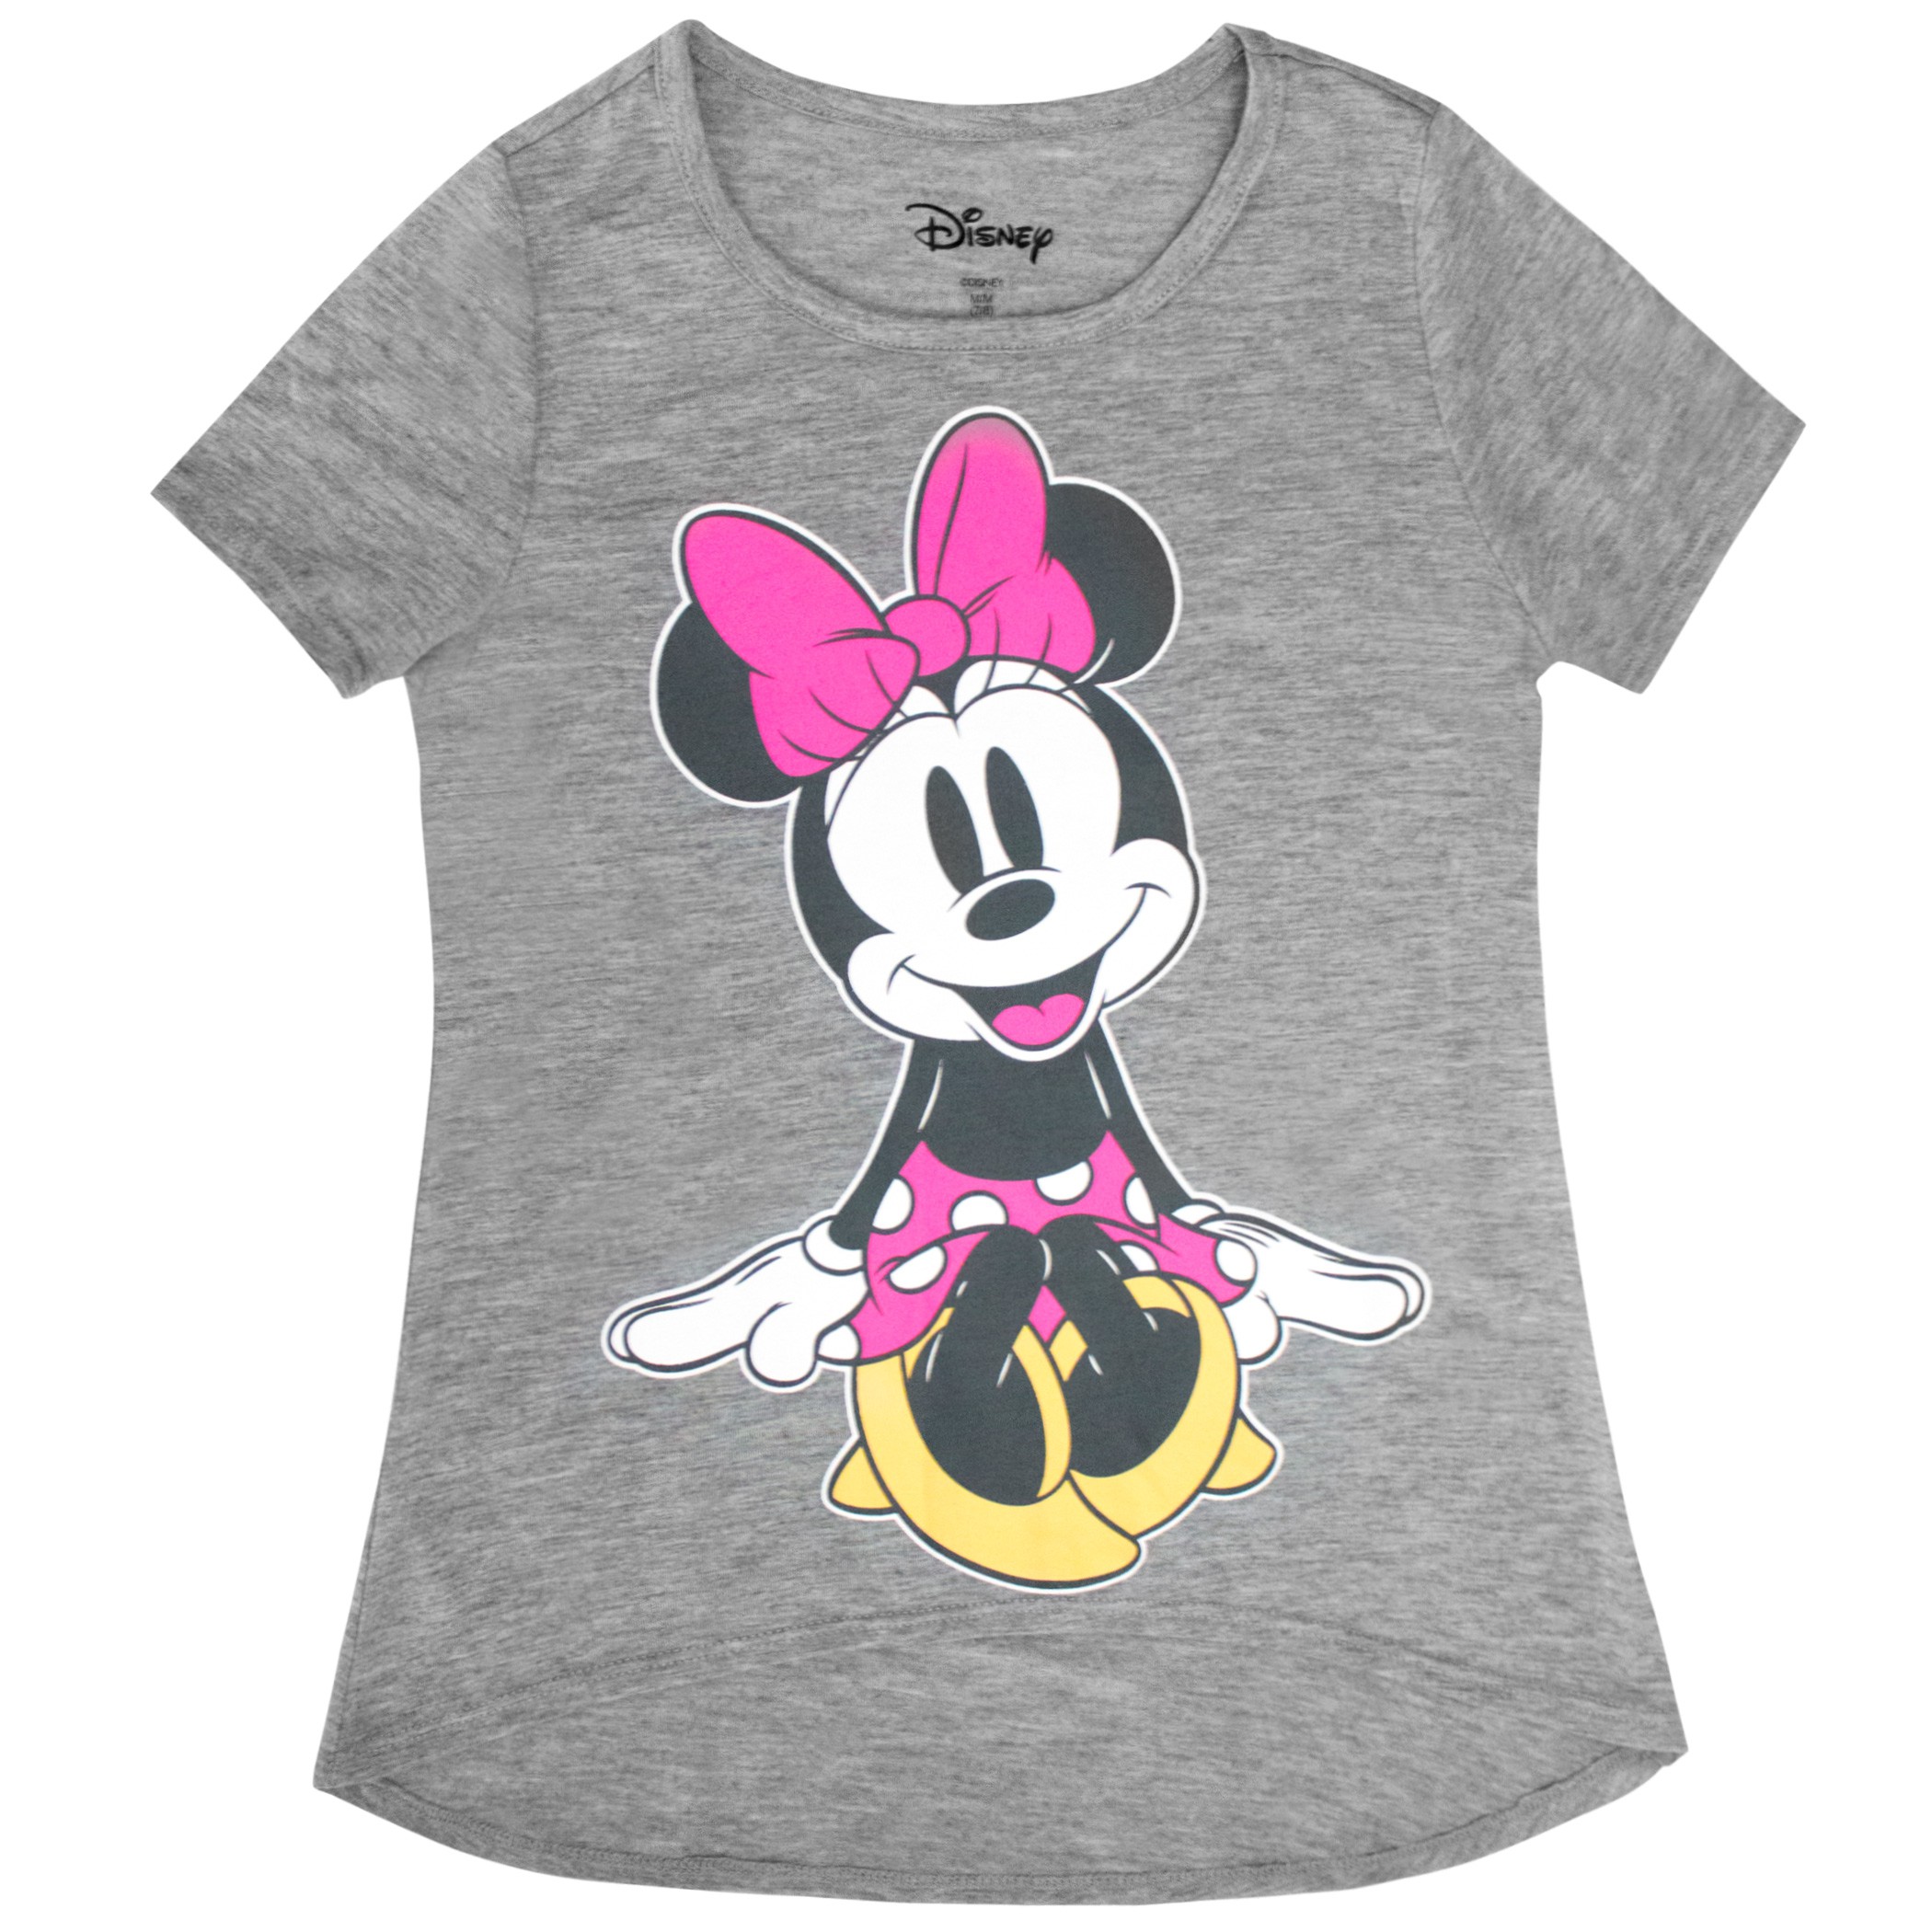 Minnie Mouse Cutie Grey Girl's Youth T-Shirt